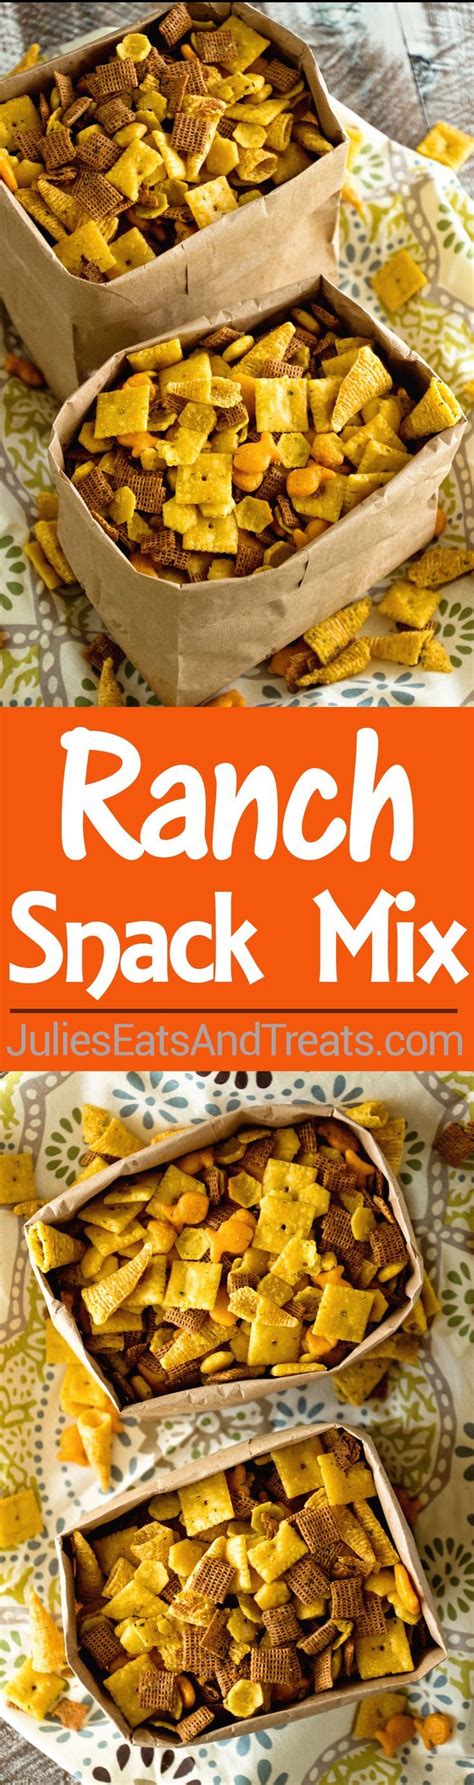 Yummy appetizers chex mix recipes food snack recipes sweet snacks holiday cooking appetizer snacks snacks snack mix recipes. Ranch Snack Mix Recipe - Julie's Eats & Treats | Snack mix ...